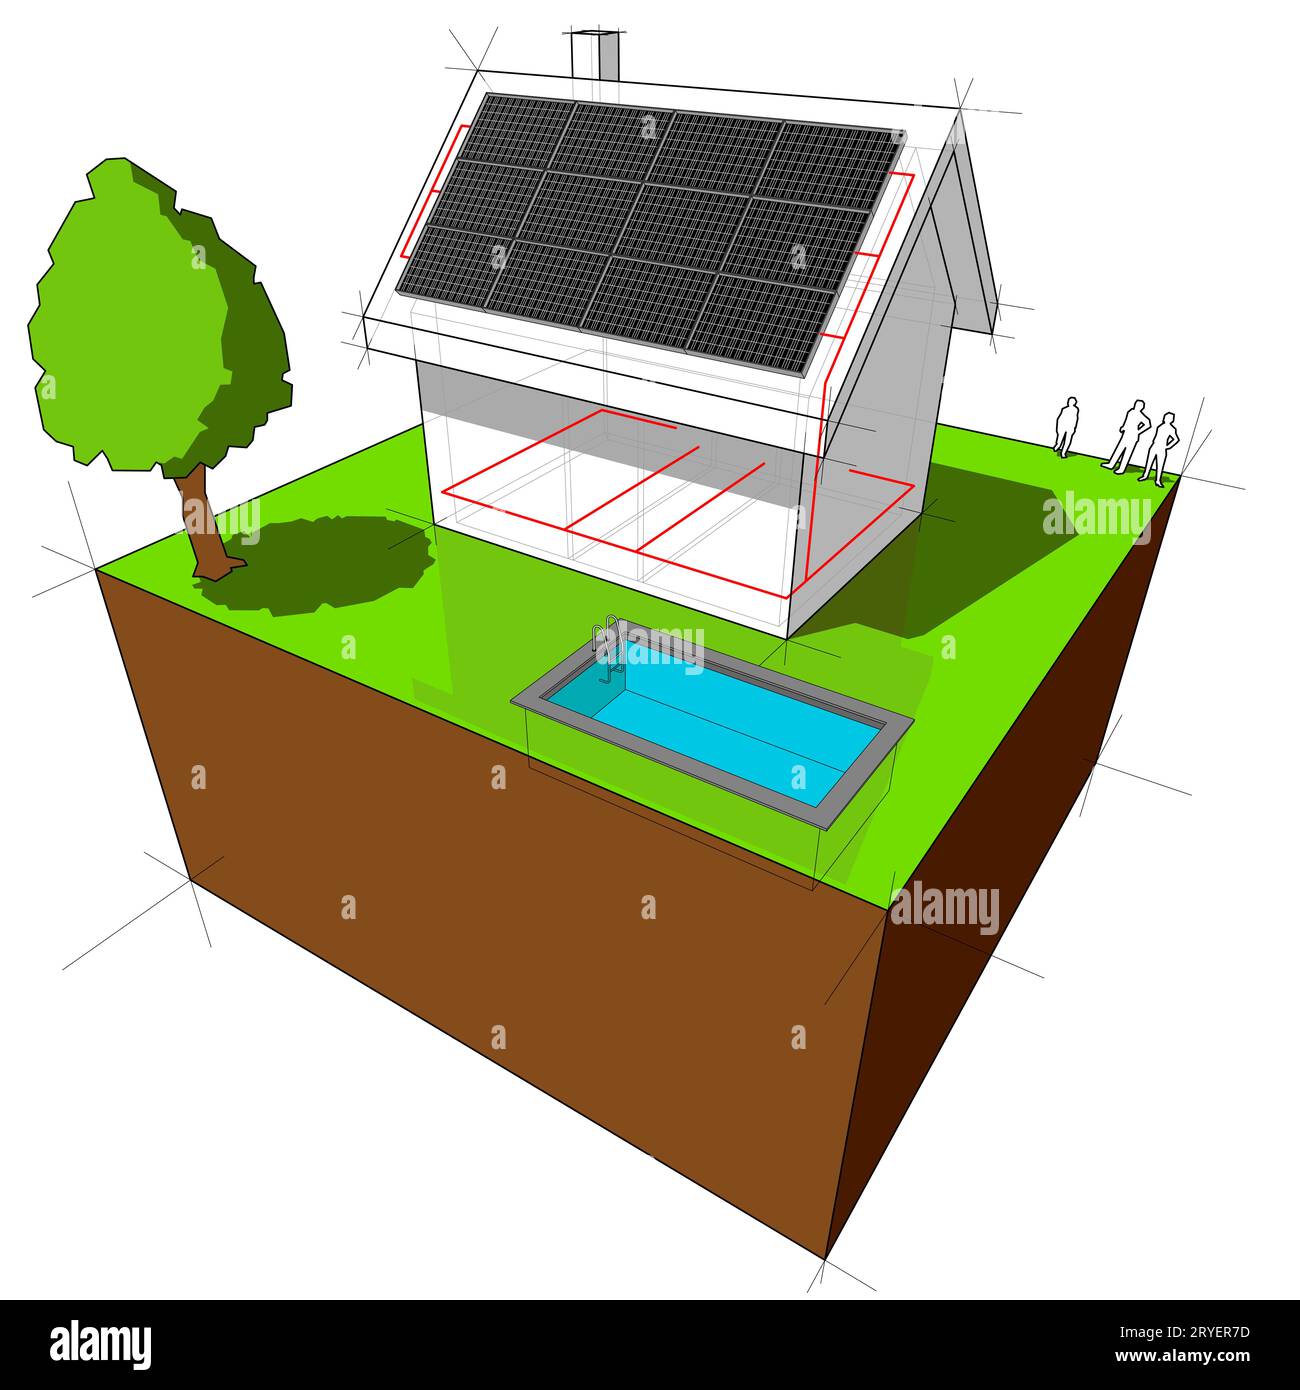 House with photovoltaic panels on the roof Stock Photo